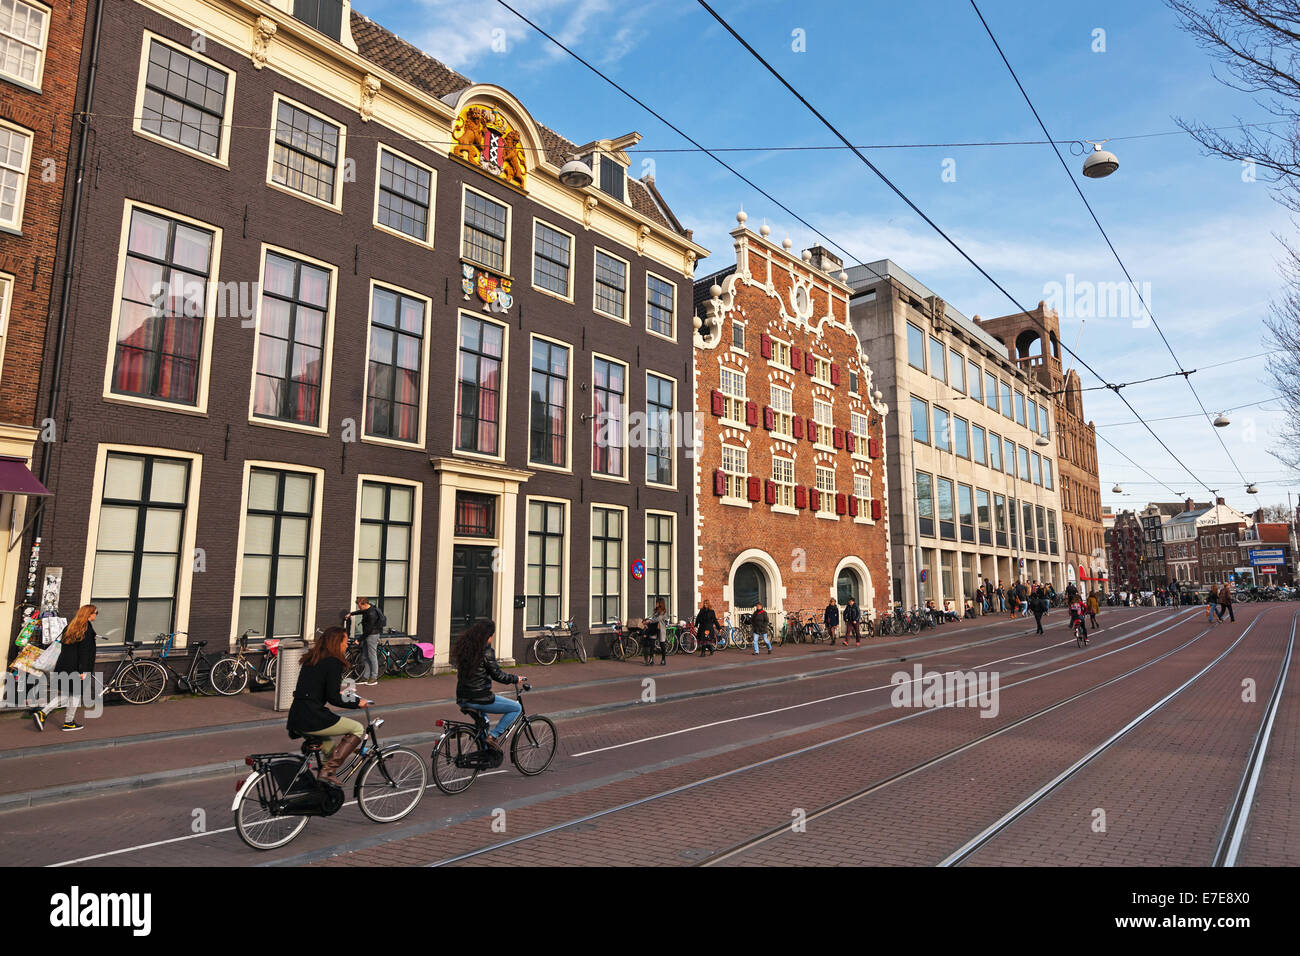 AMSTERDAM, NETHERLANDS - MARCH 19, 2014: Streetview with colorful brick houses. Ordinary people are on the street Stock Photo